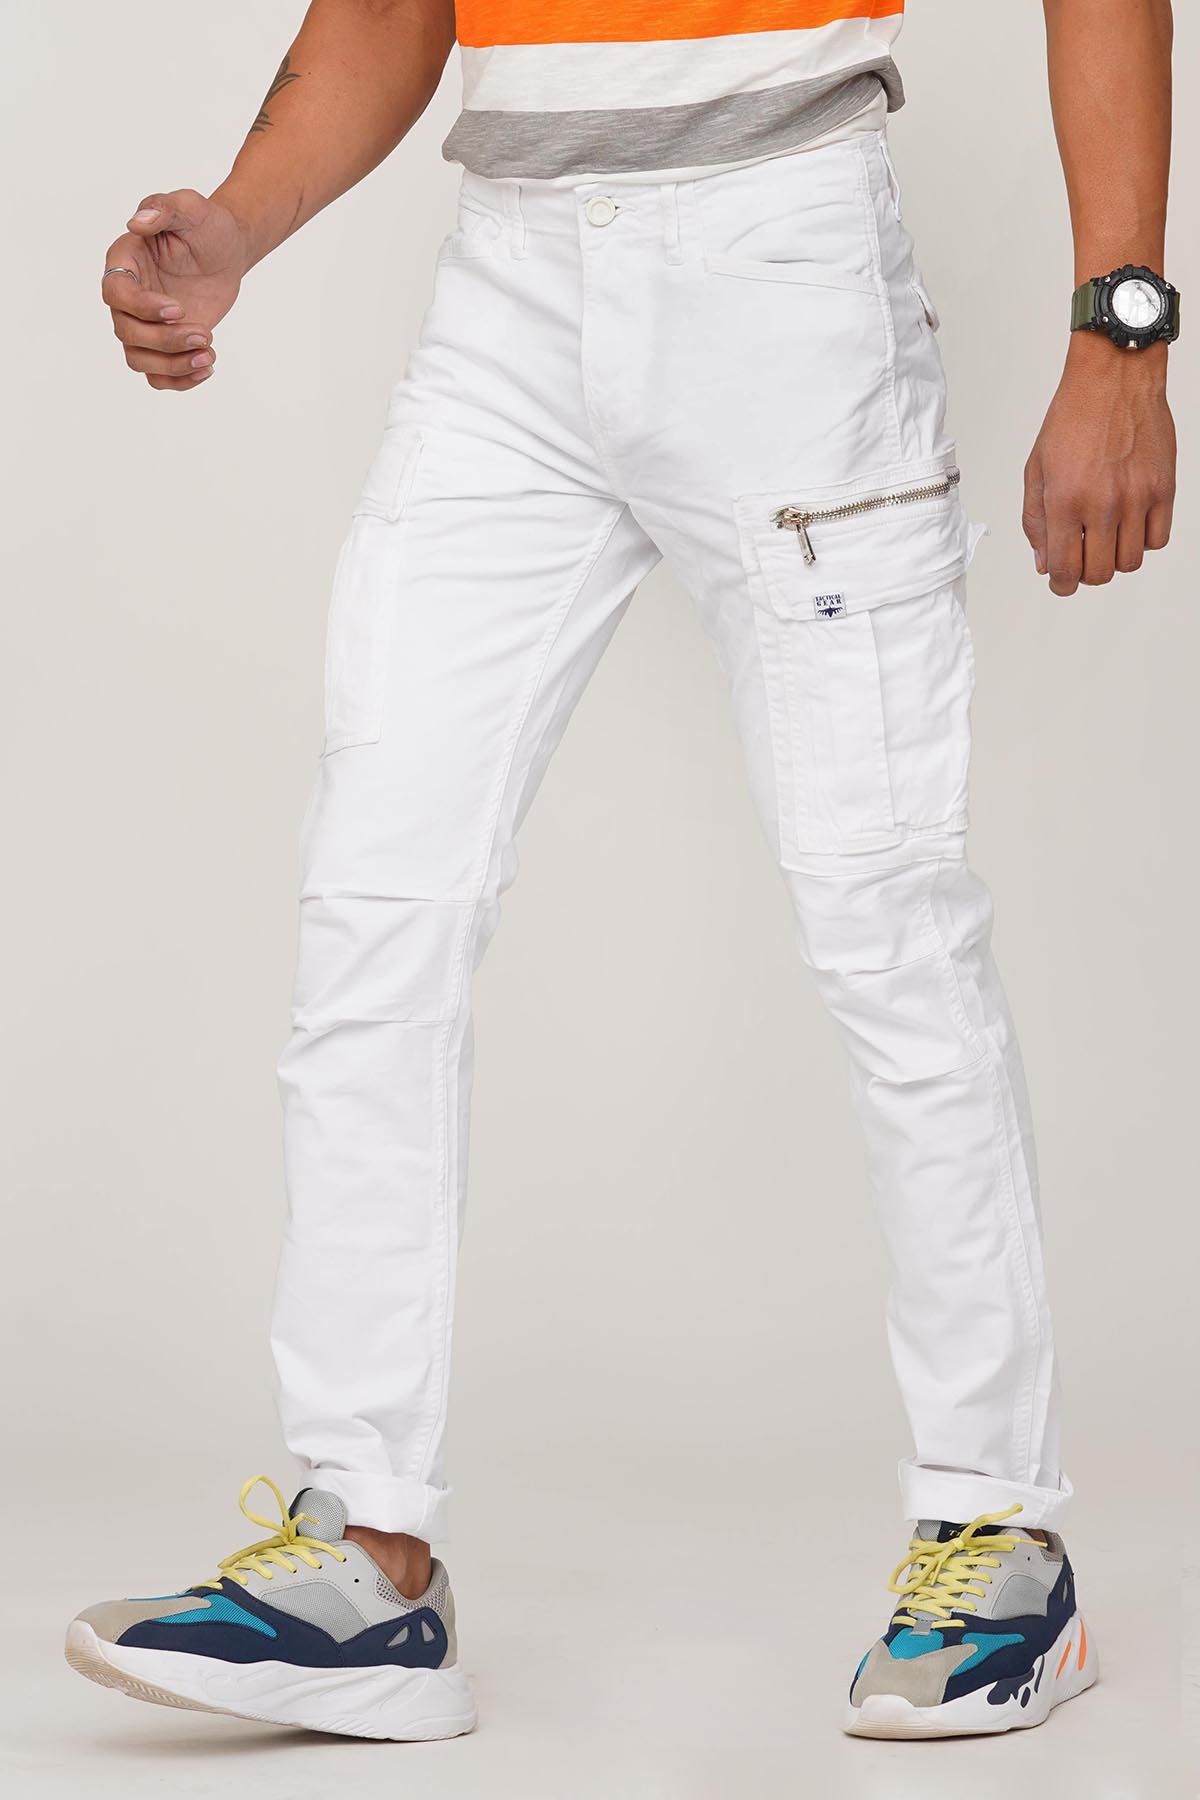 Share 80+ white baggy pants latest - in.eteachers